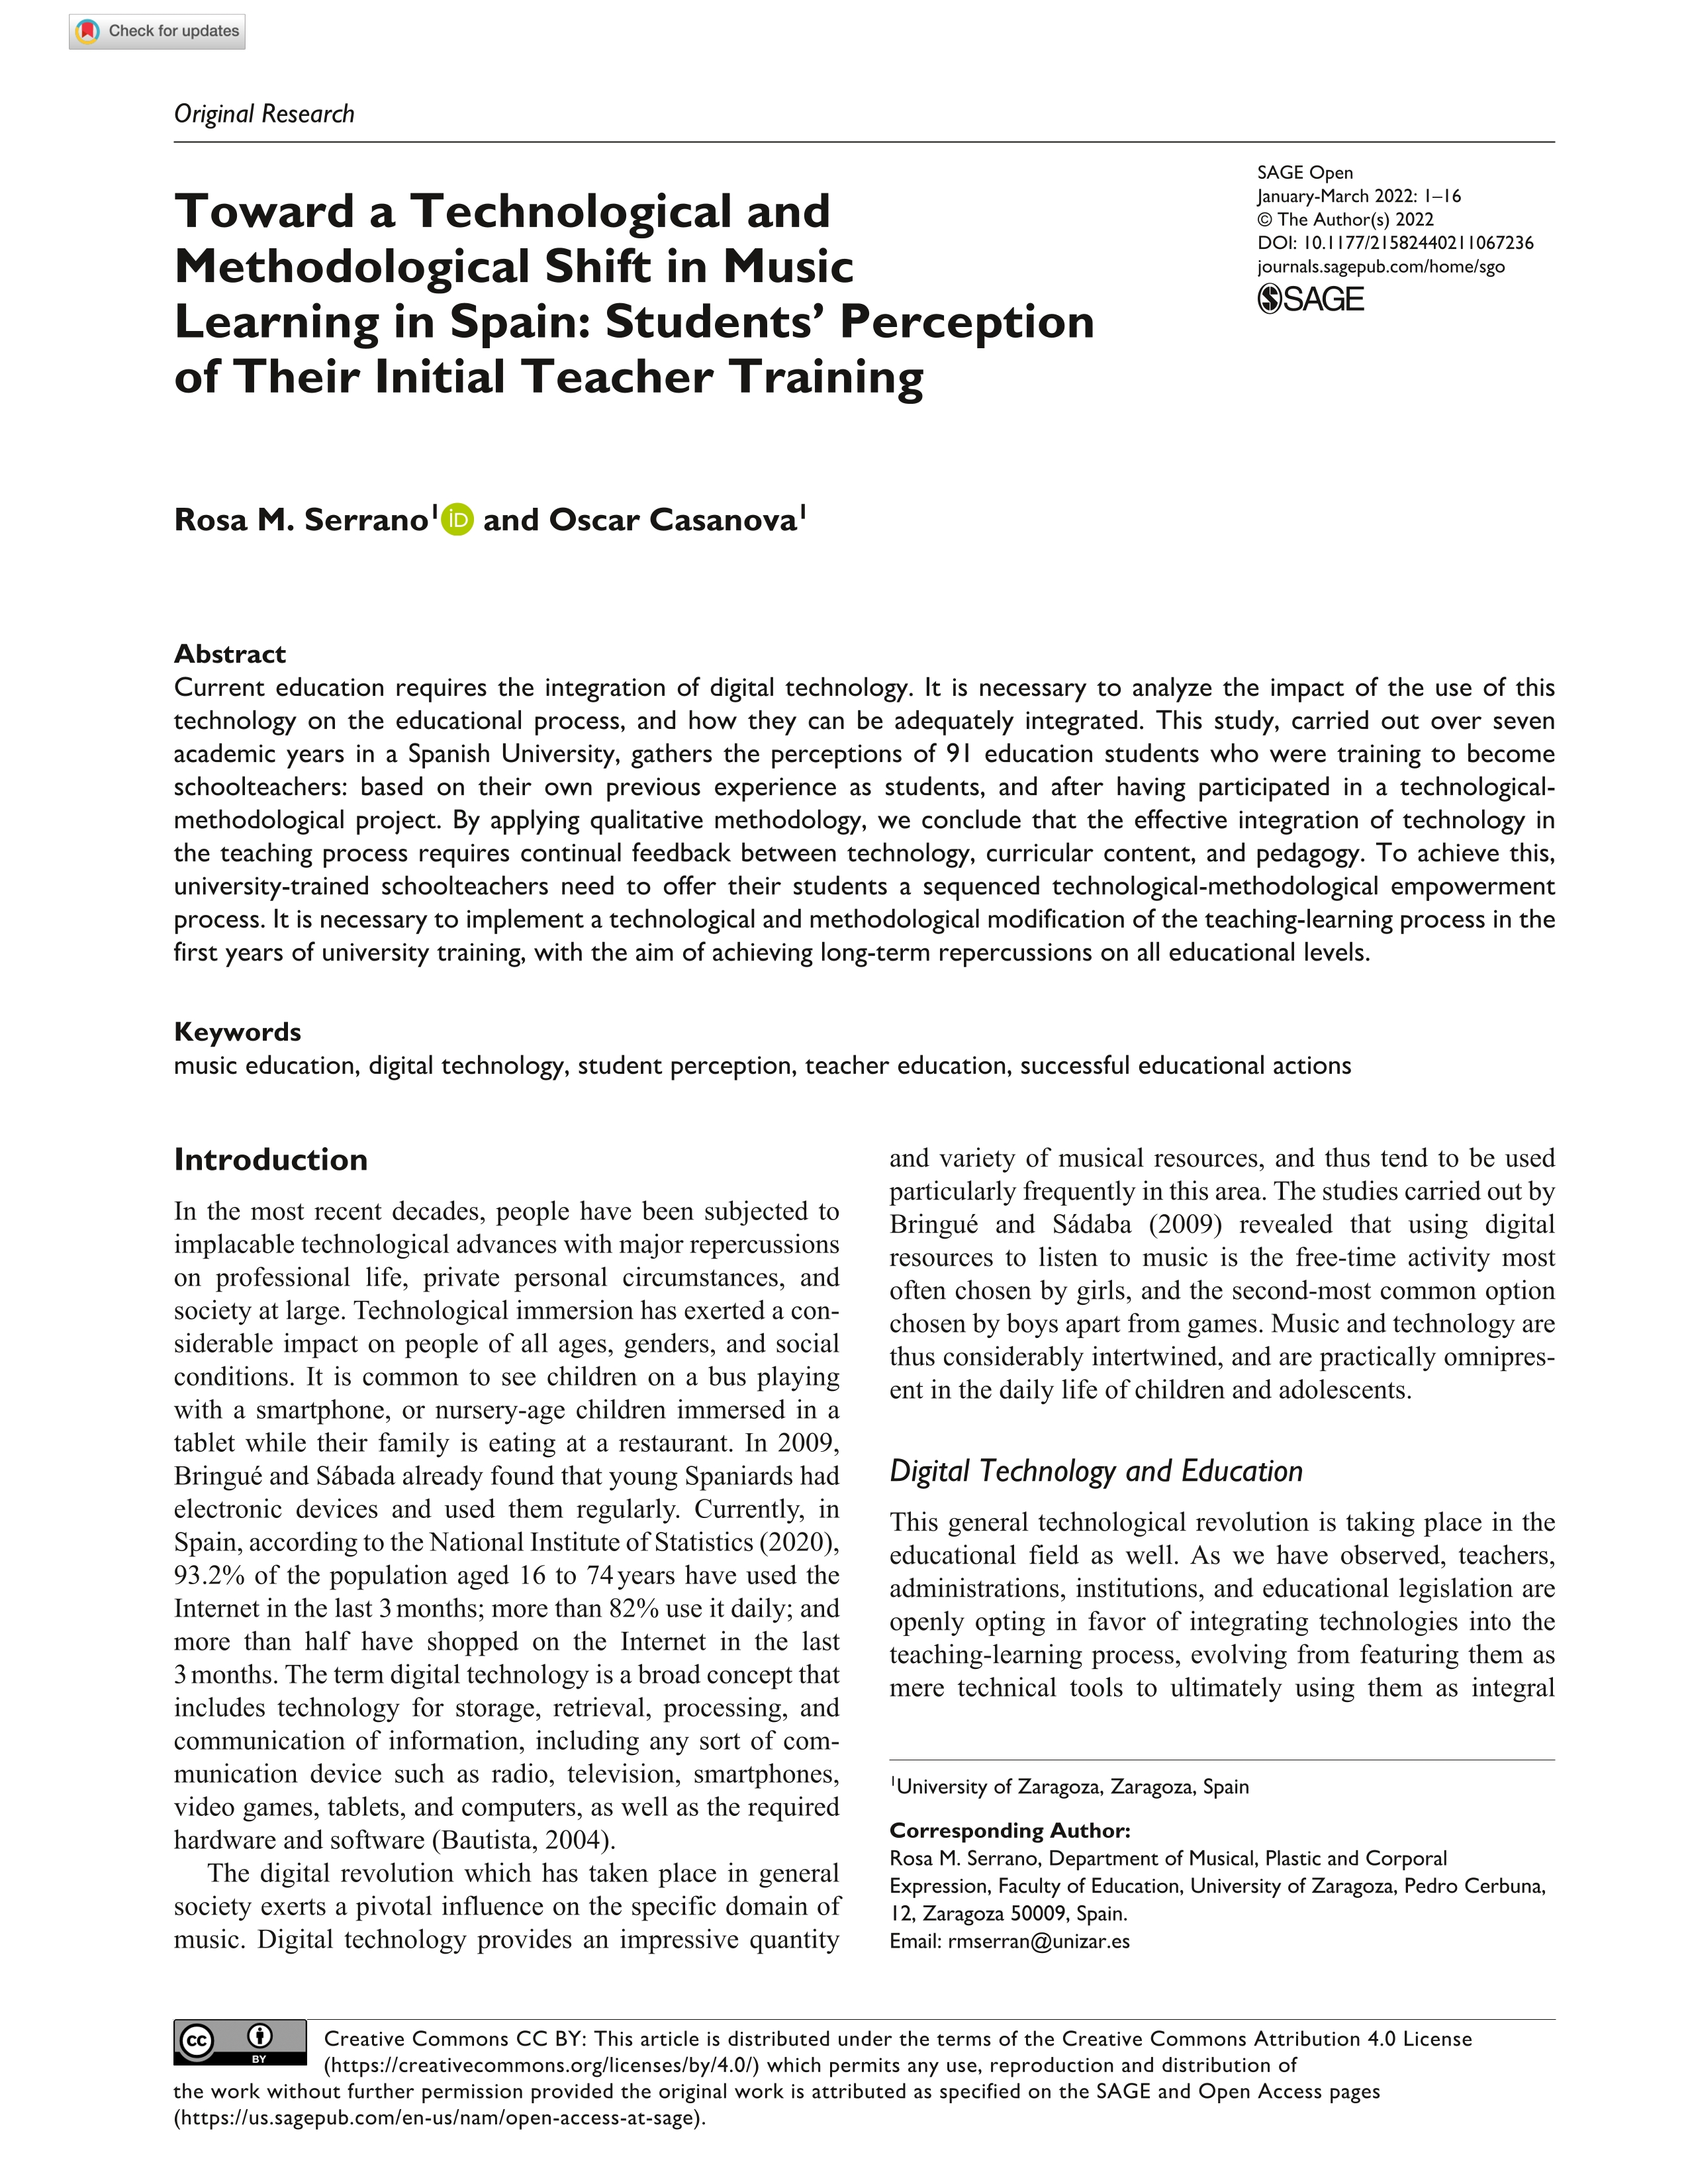 Toward a technological and methodological shift in music learning in Spain: students’ perception of their initial teacher training